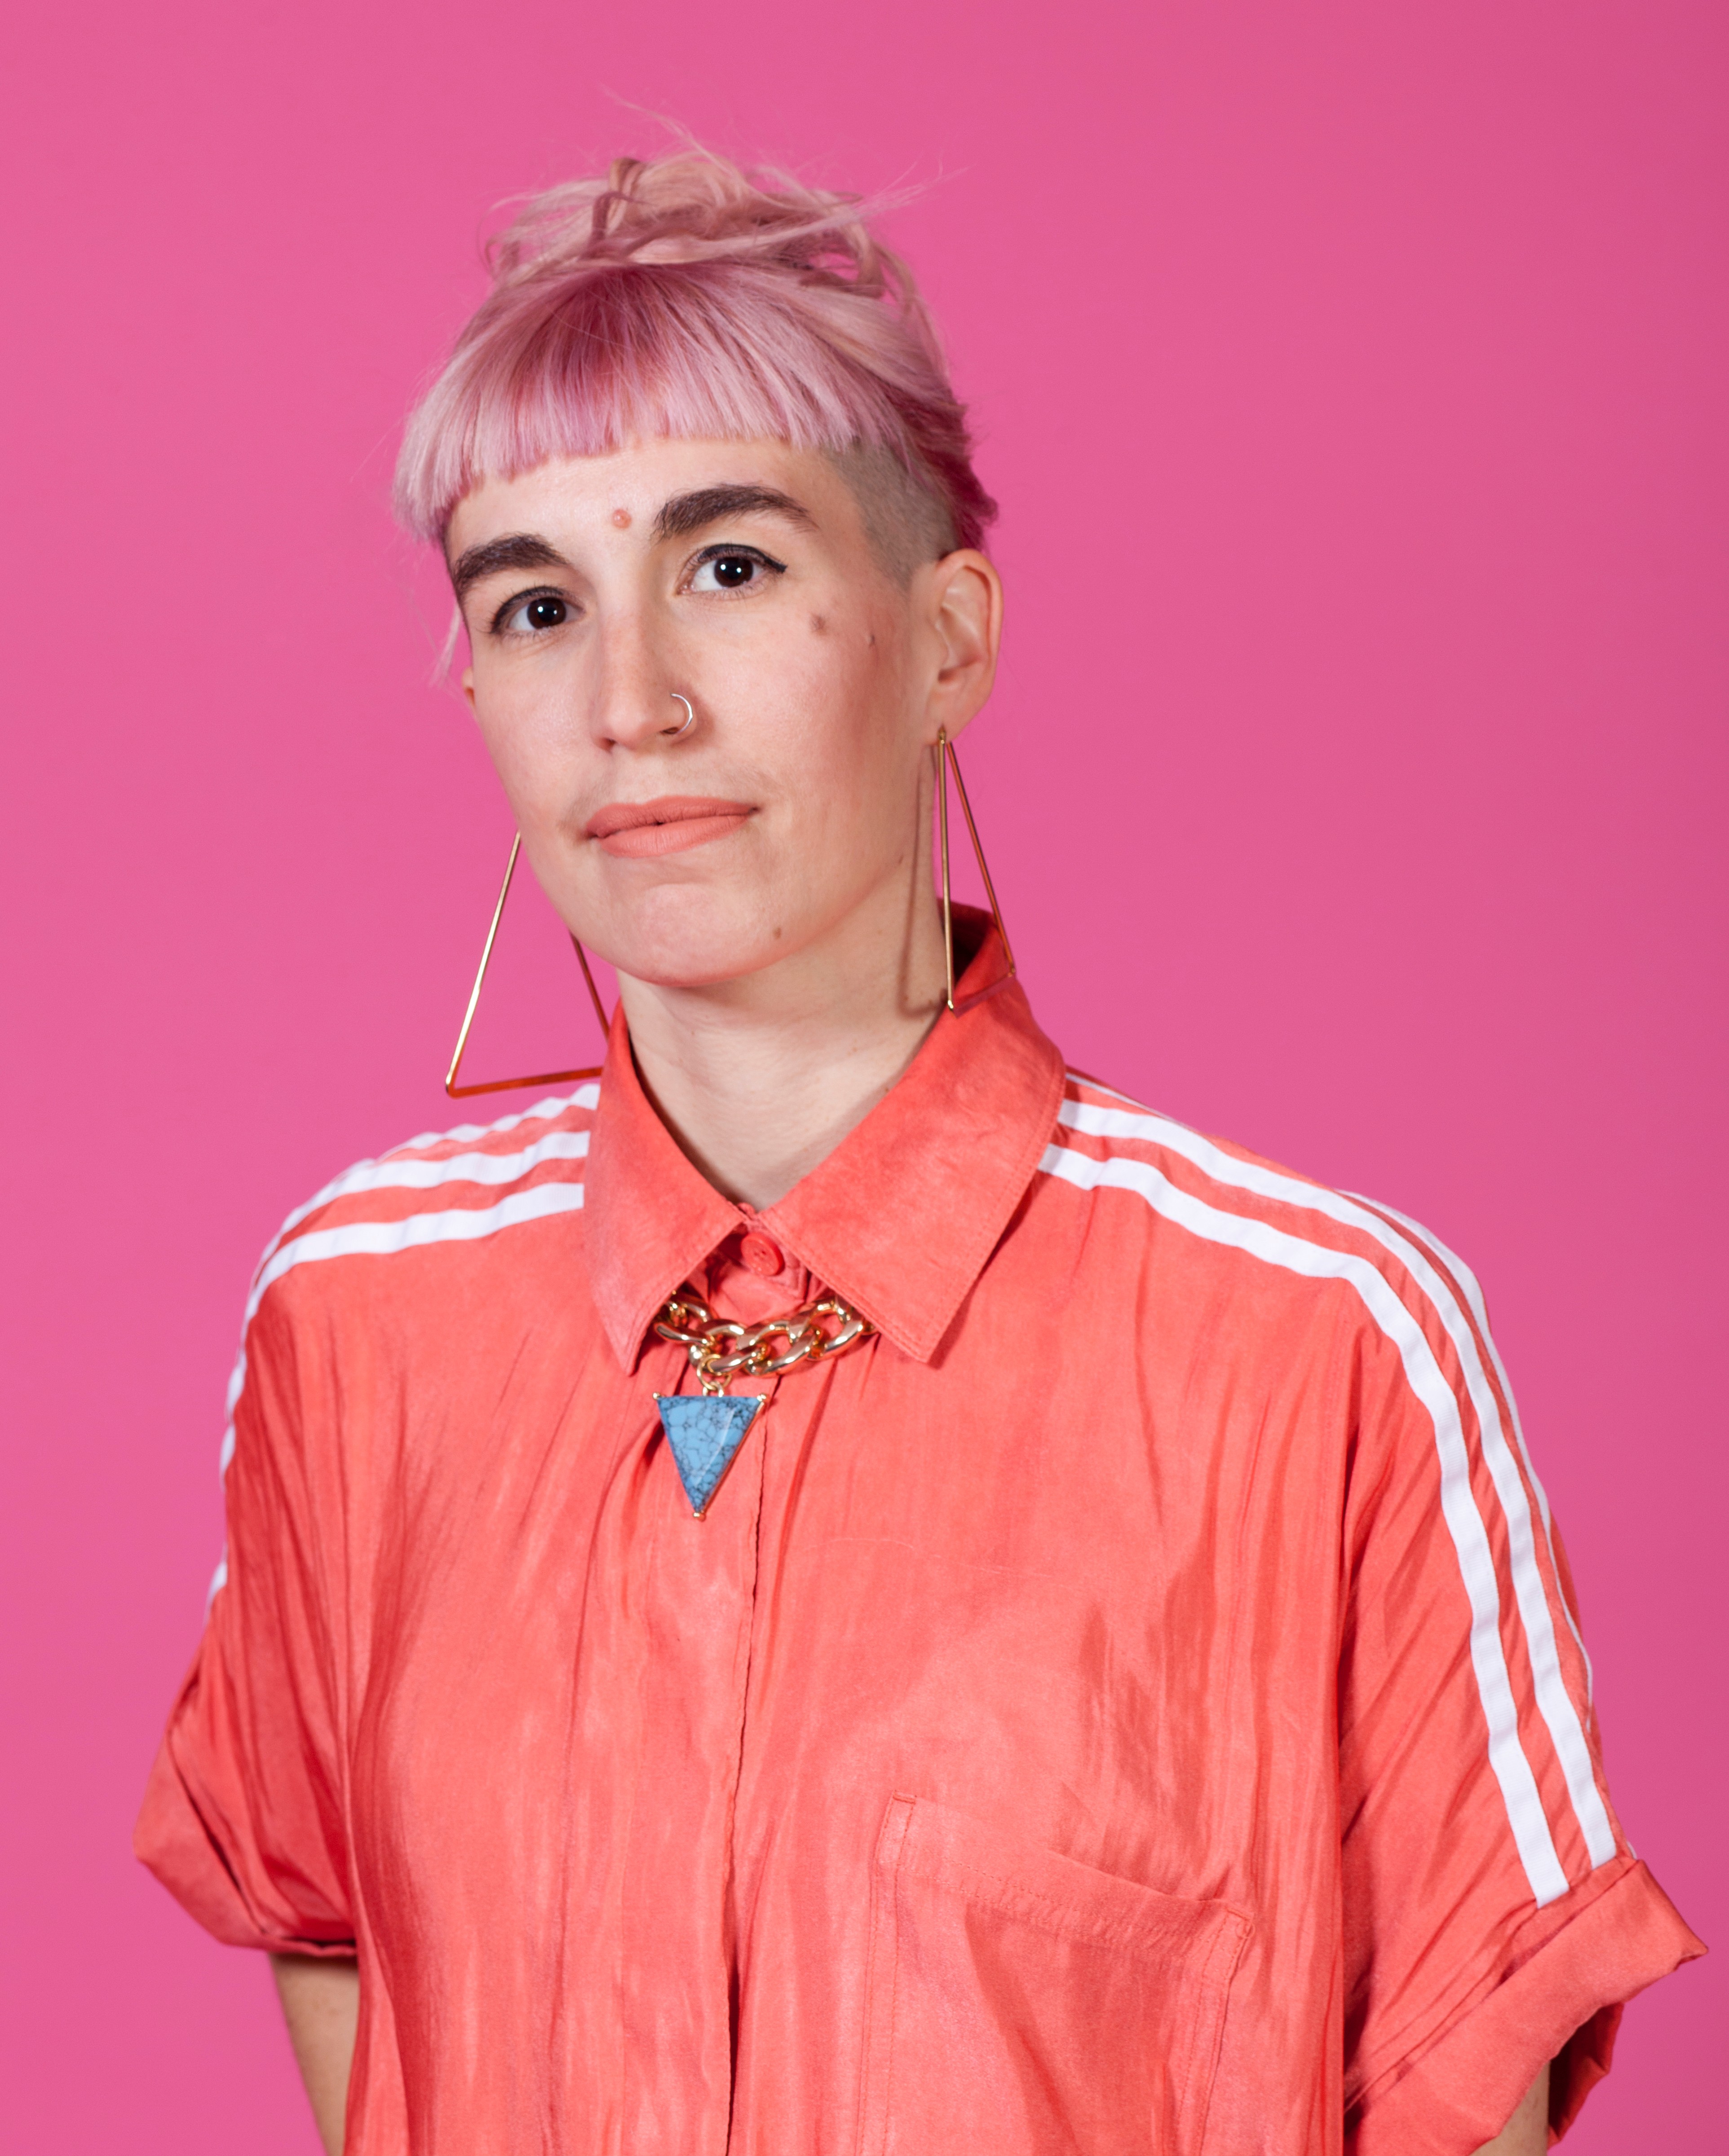 A woman with a short pink fringe and large triangle earrings wearing an apricot shirt with white stripes.